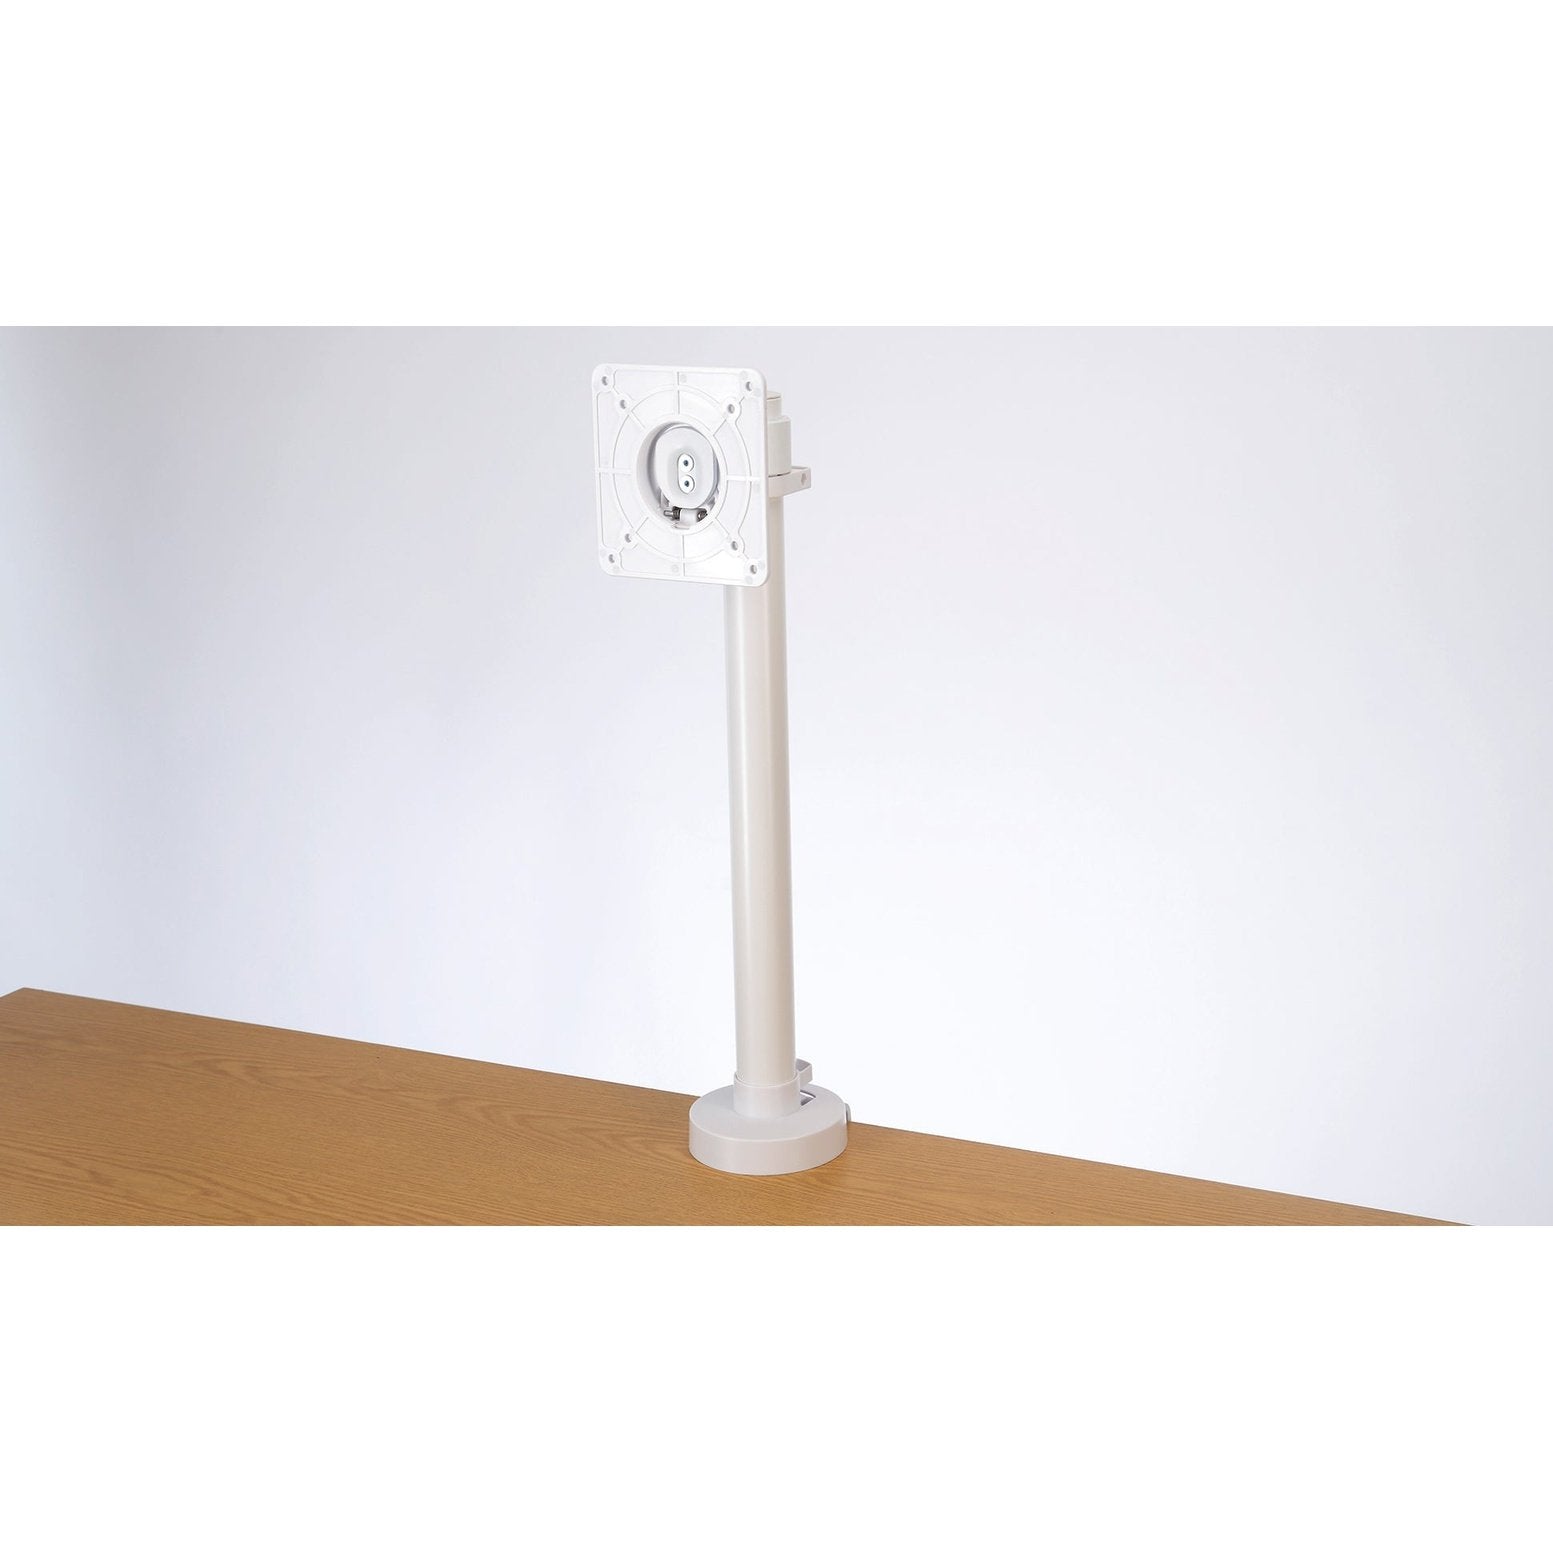 Impulse Pole Mount Arm - Steel, Self-Assembly, 460mm Height, 15-Year Guarantee - Ideal for Home & Commercial Use